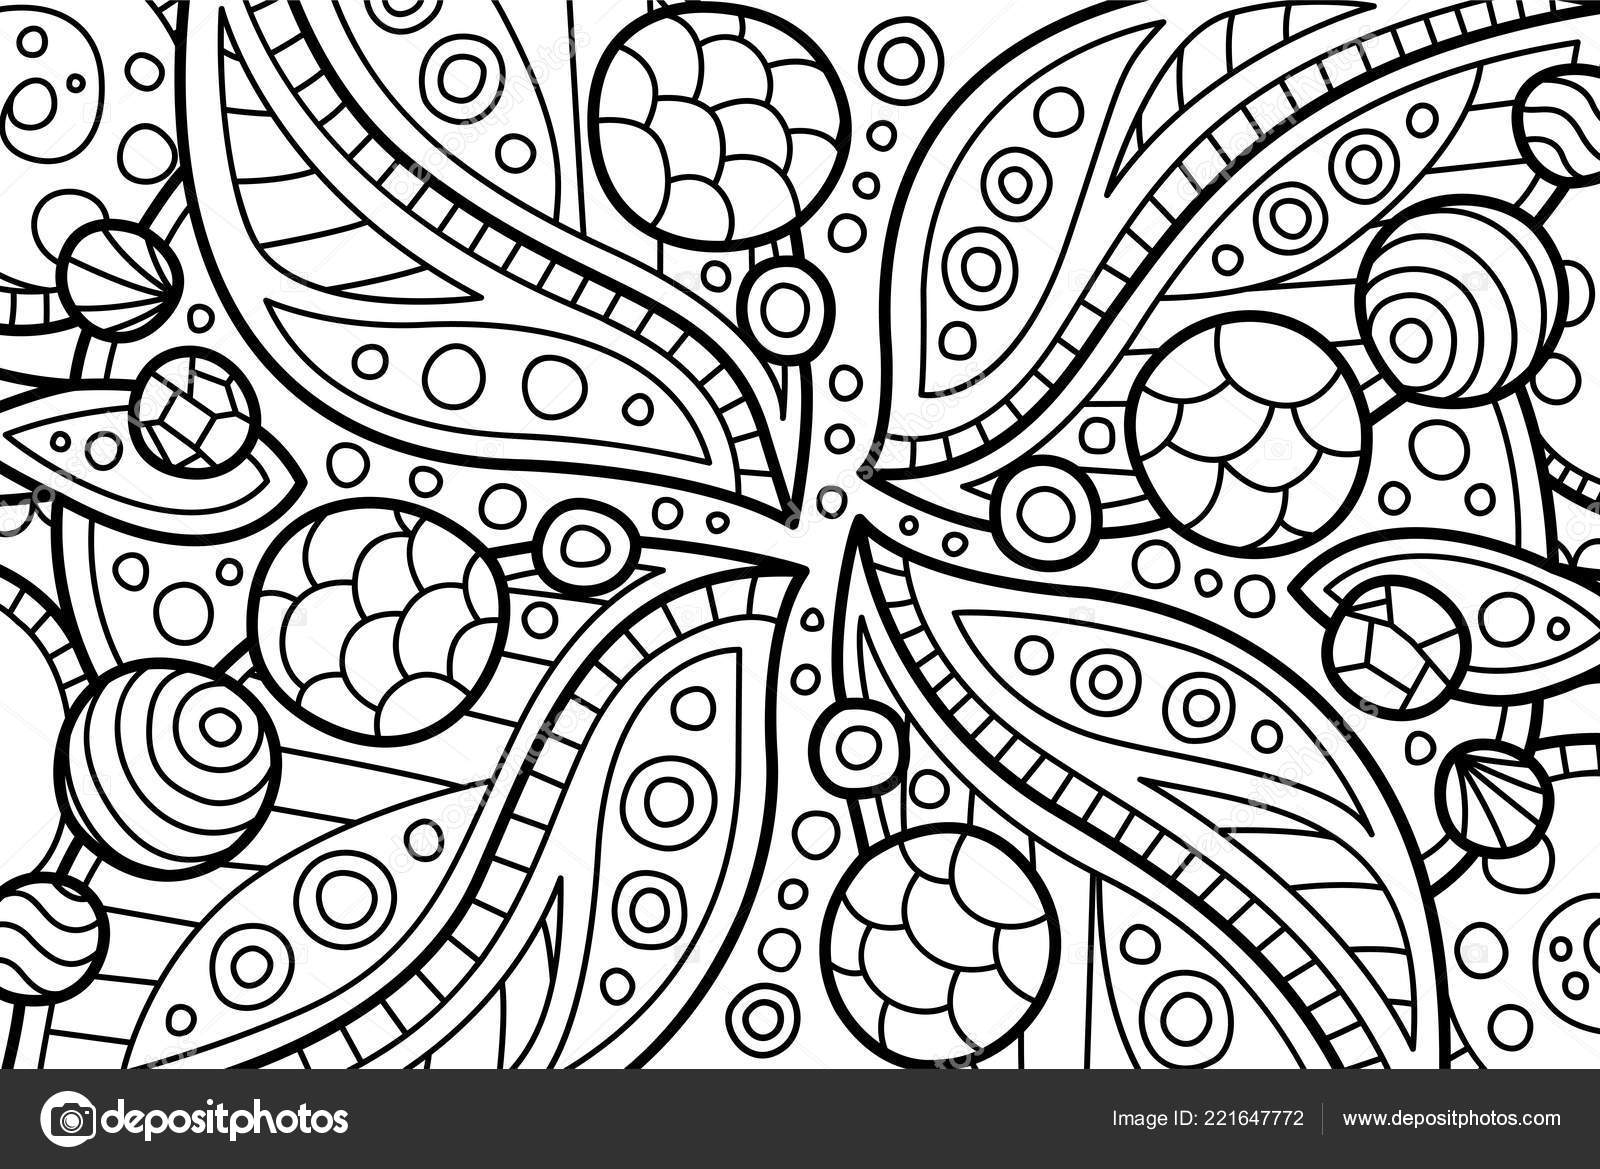 Rectangle cosmic coloring book page with spiral Vector Image